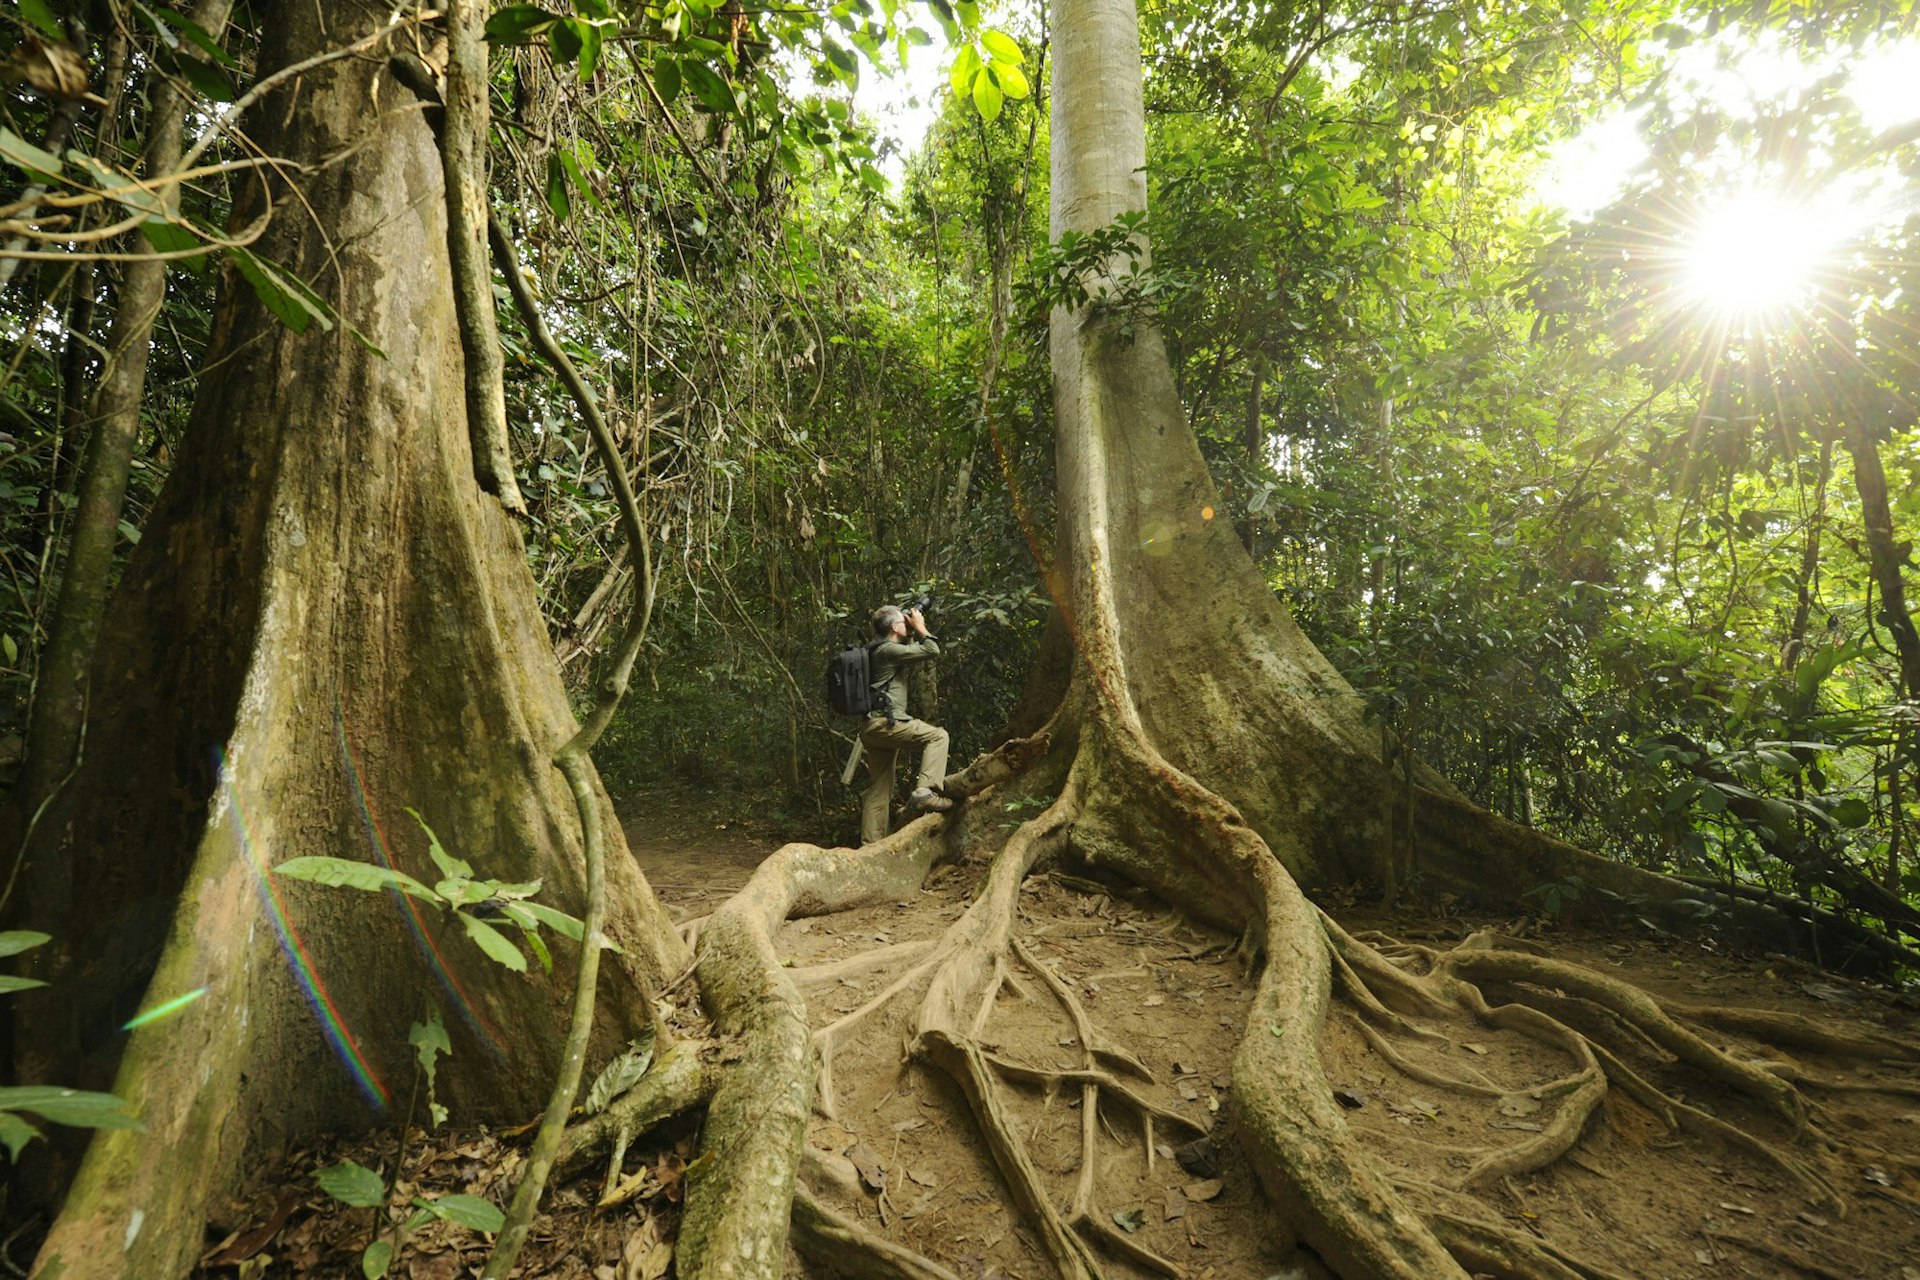 A hiker pauses to photograph buttress roots in Taman Negara National Park